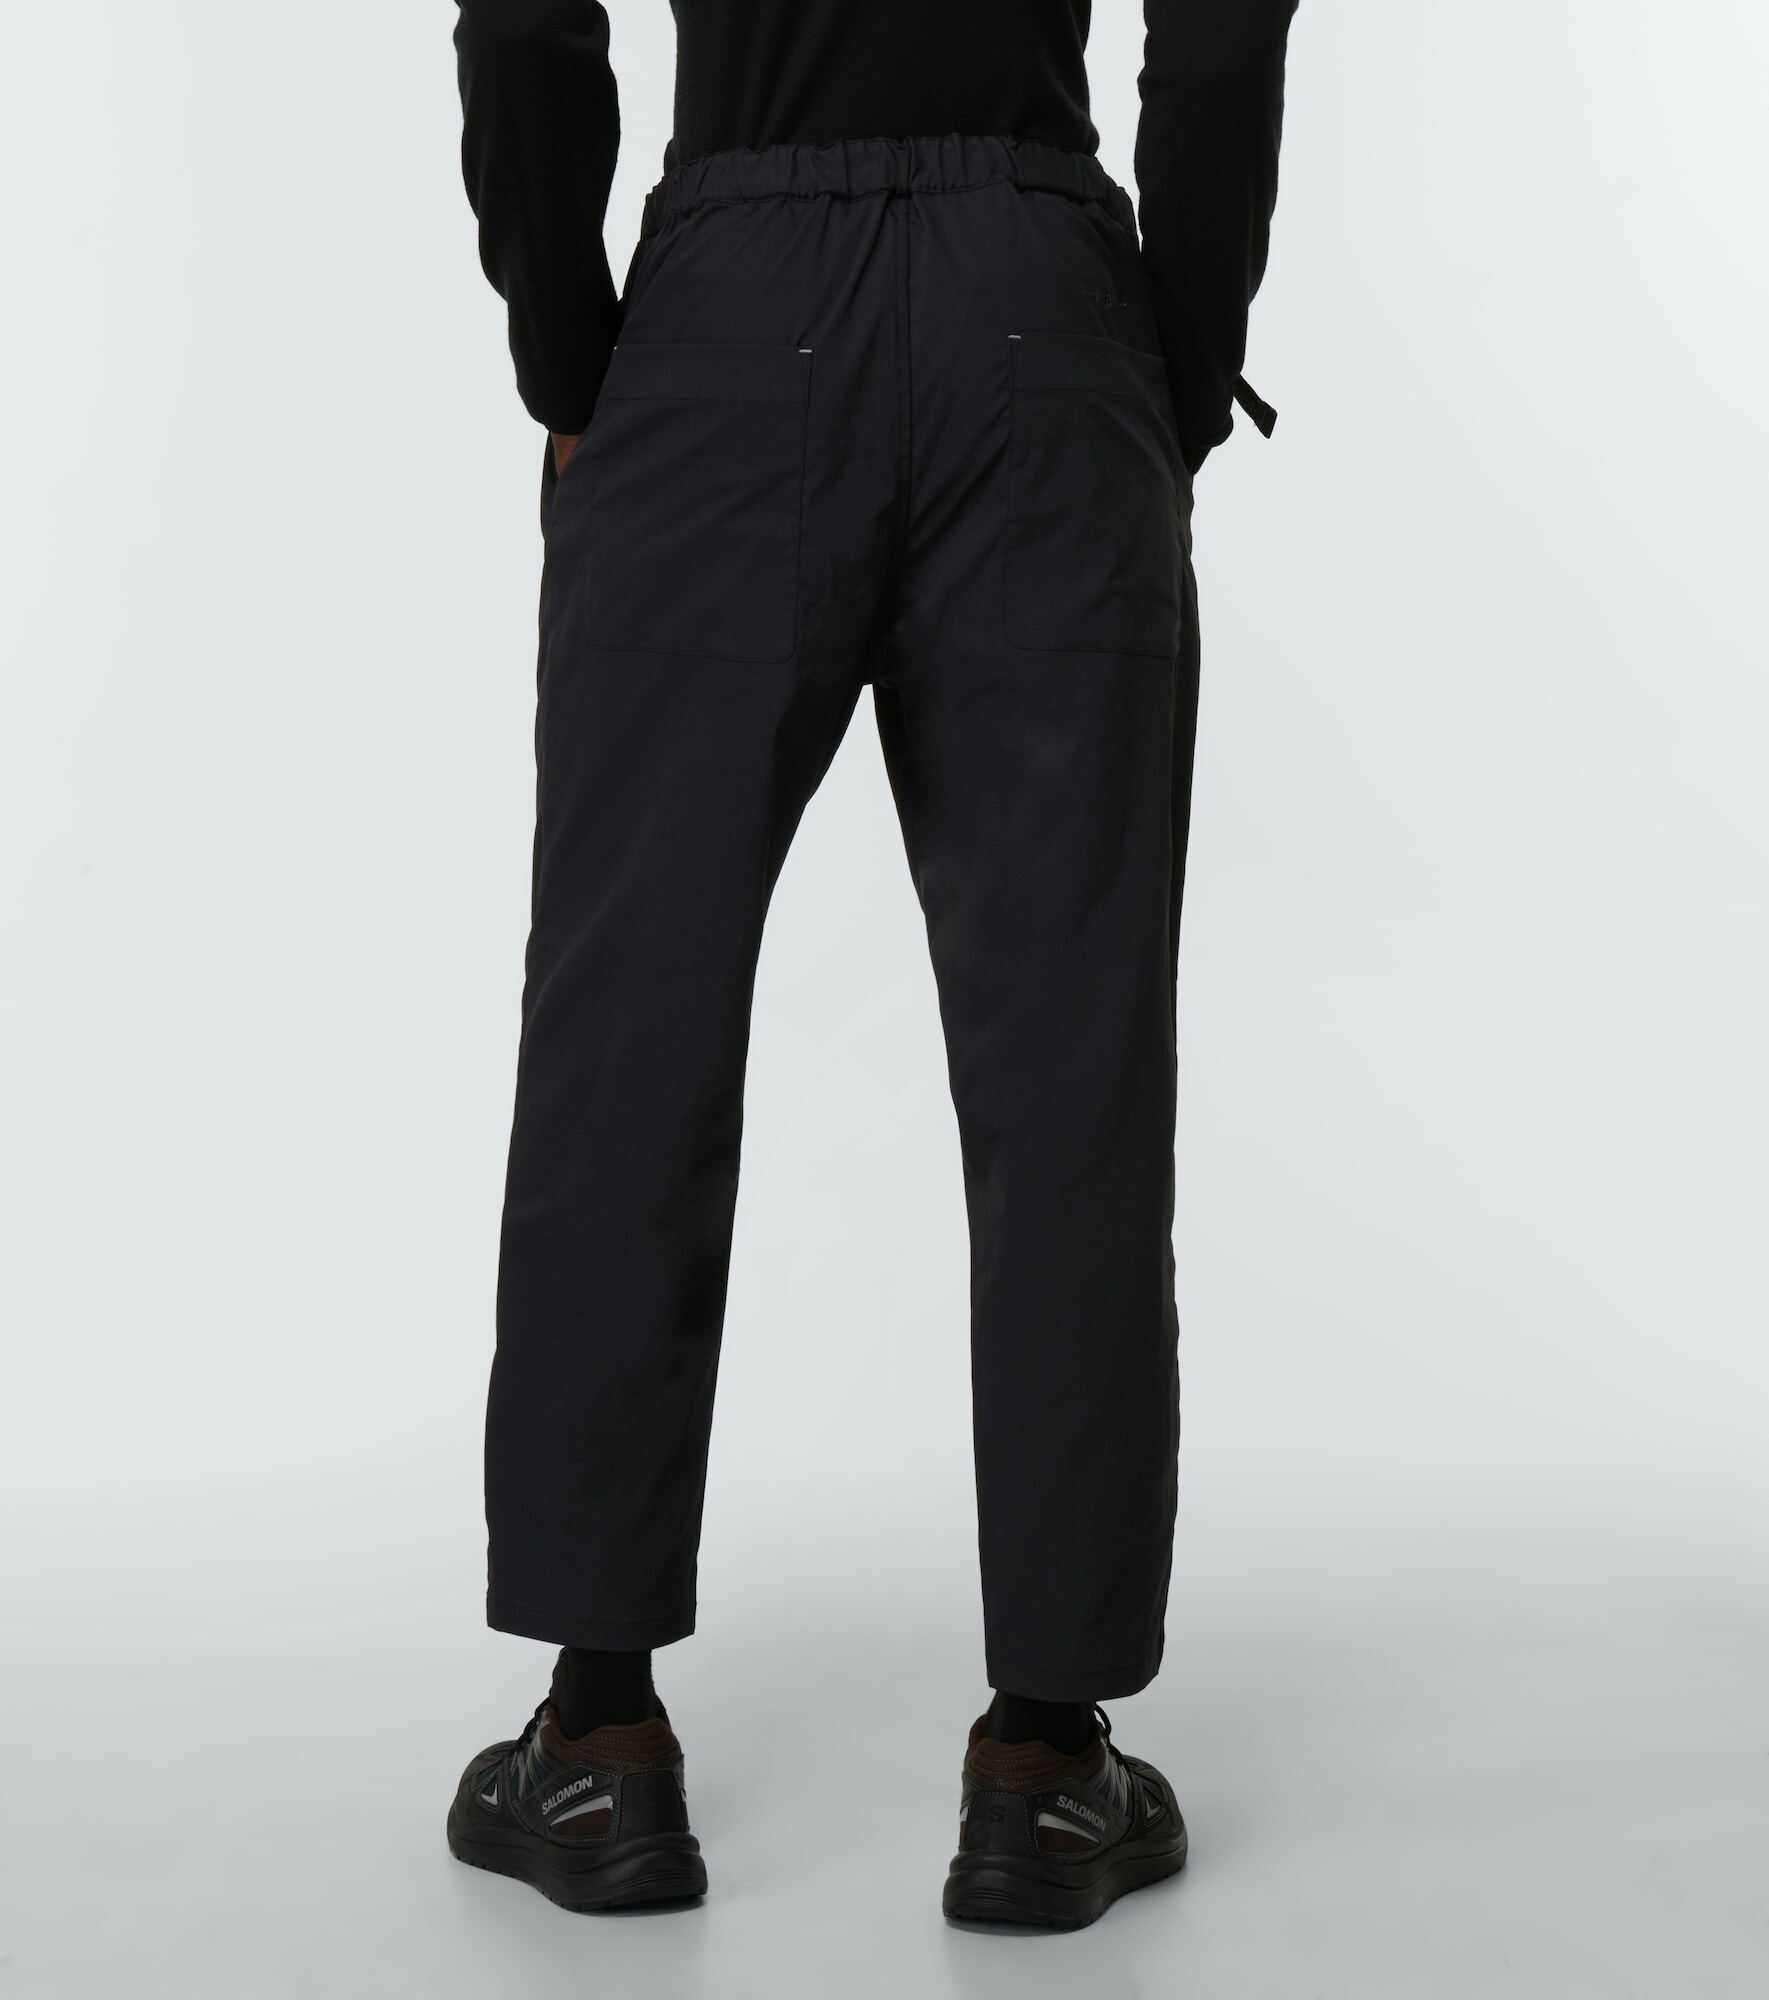 And Wander - PE OX track pants and Wander